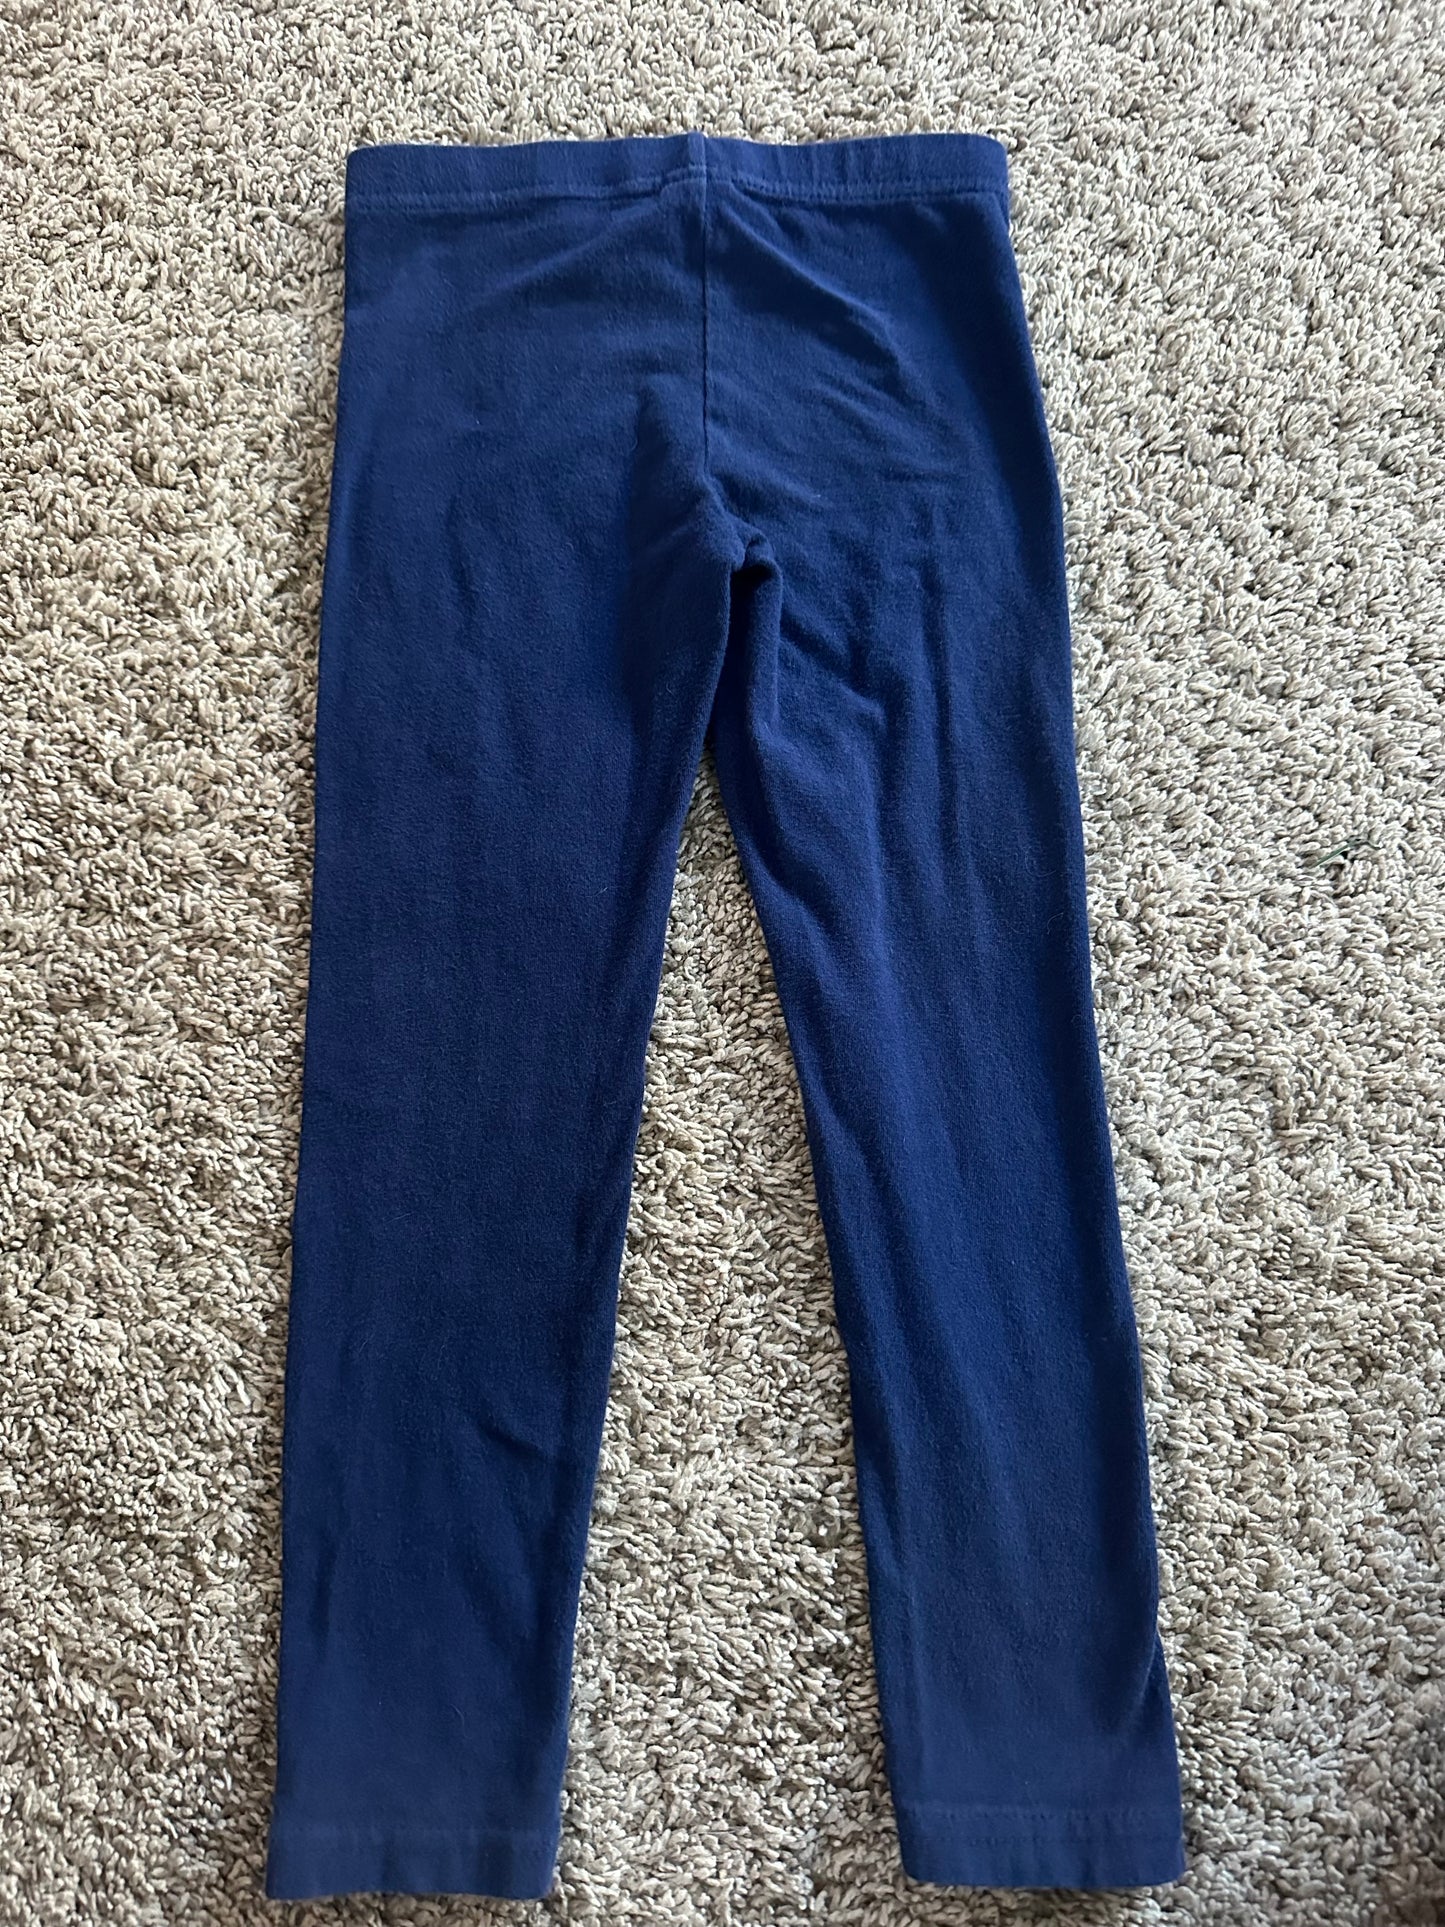 Shirt With Leggings Outfit, Size 5